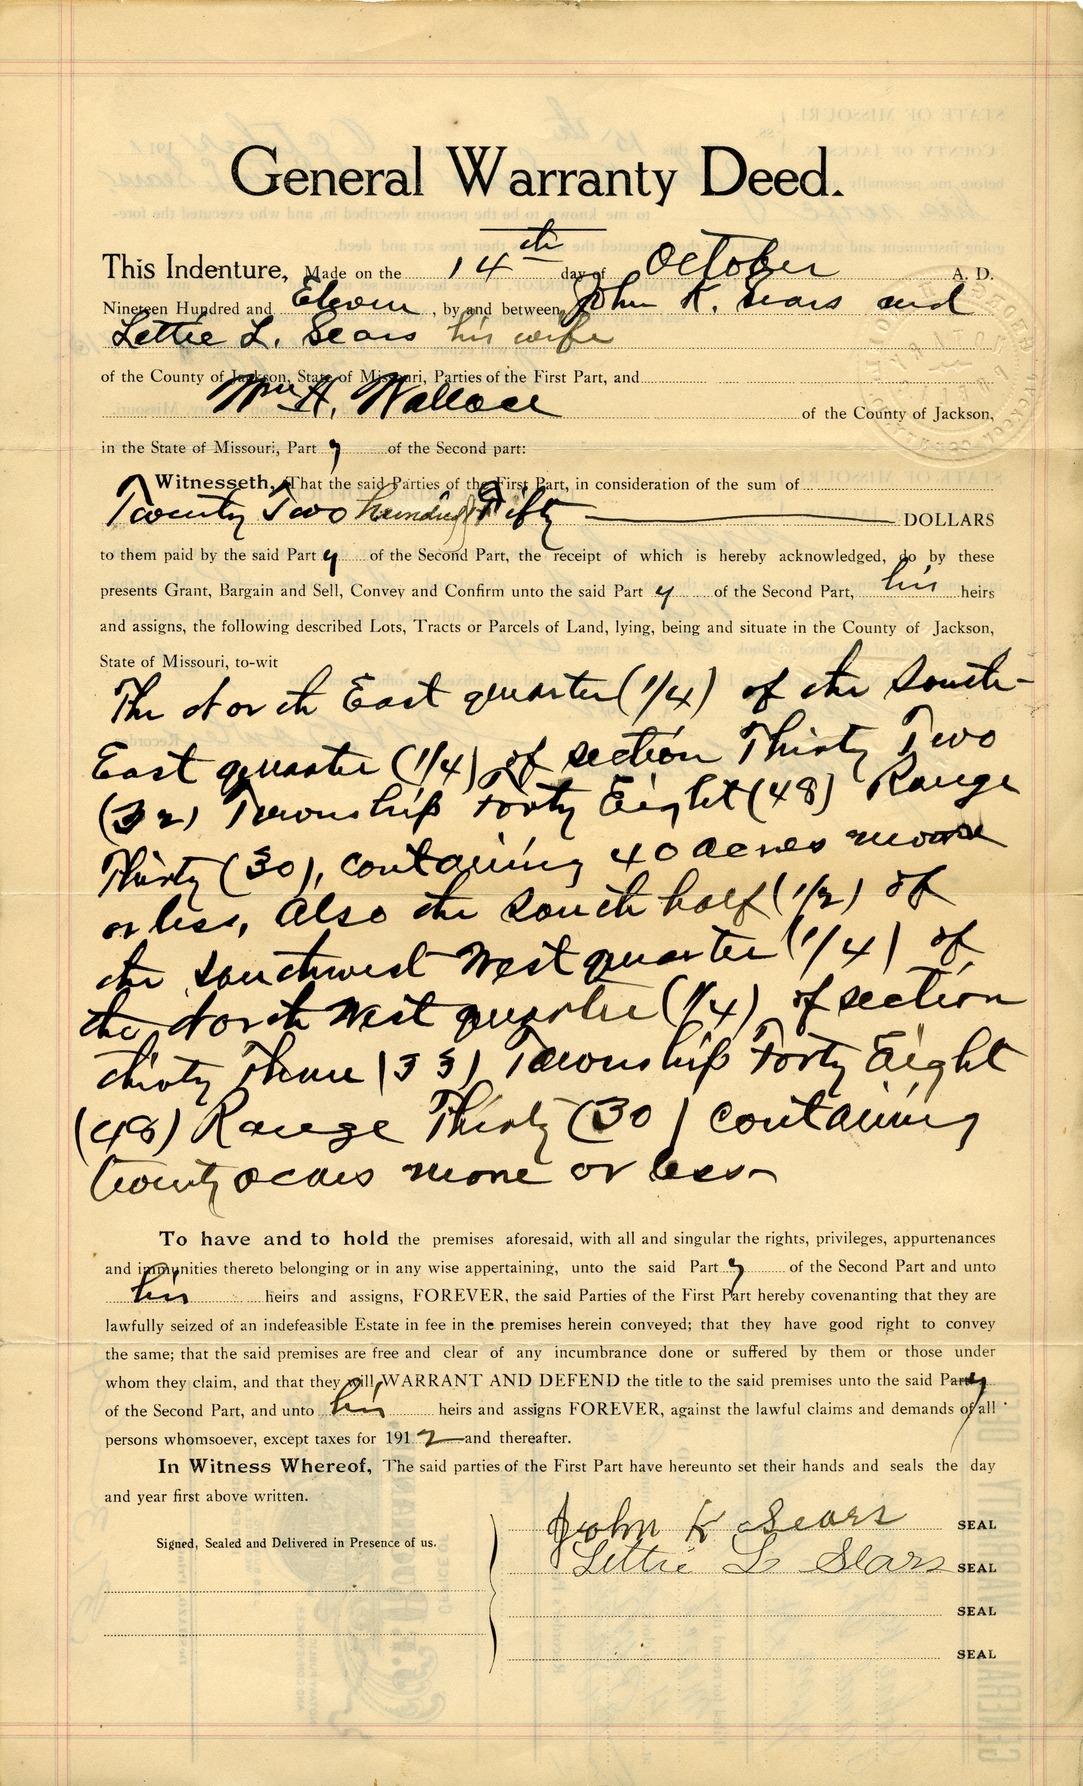 General Warranty Deed from John K. Sears and Lettie L. Sears to William H. Wallace